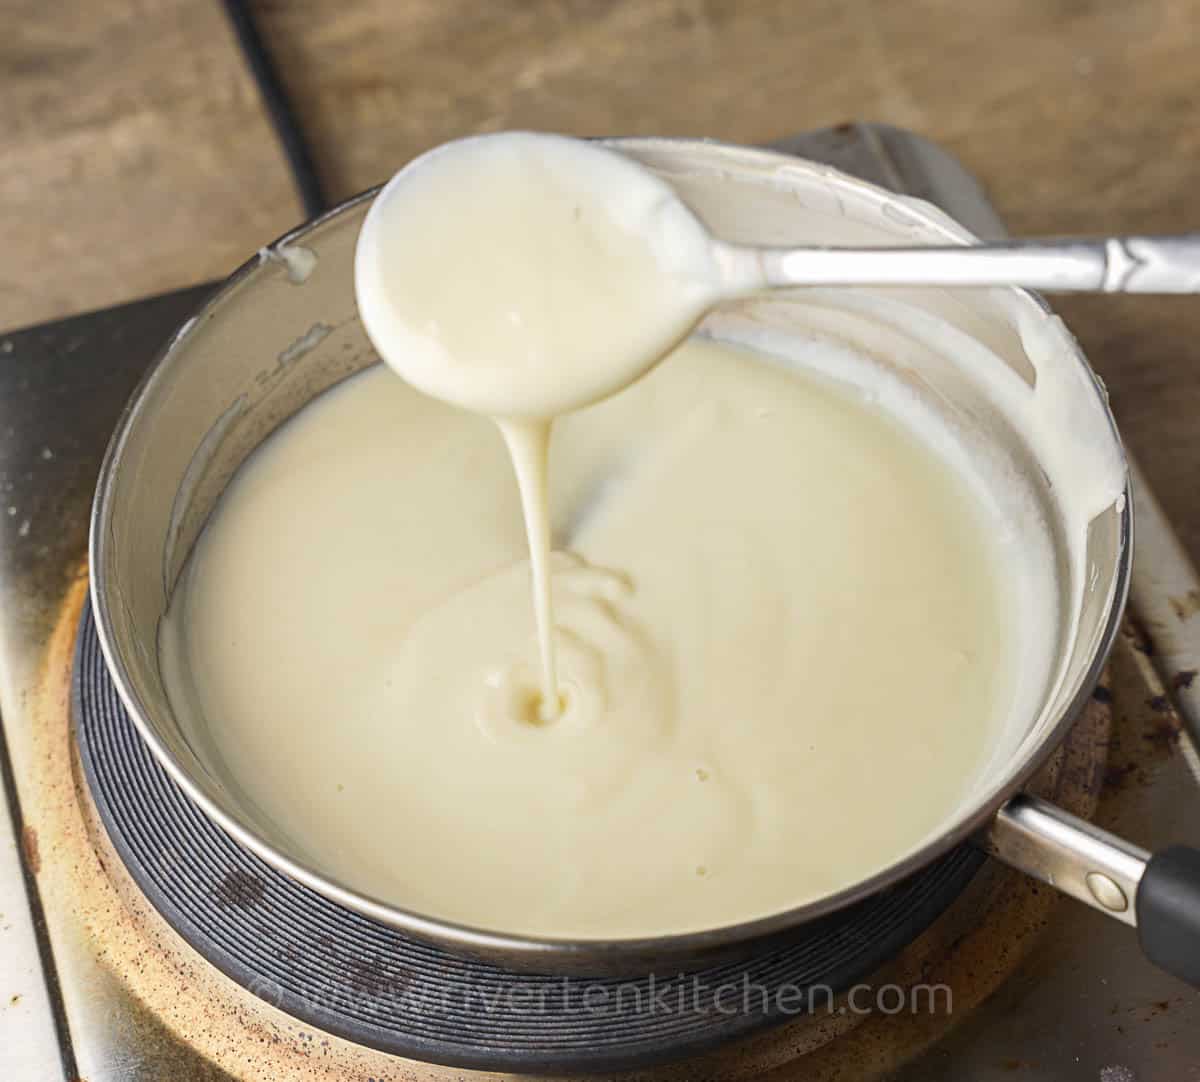 thick sweet sauce made of coconut milk and condensed milk.